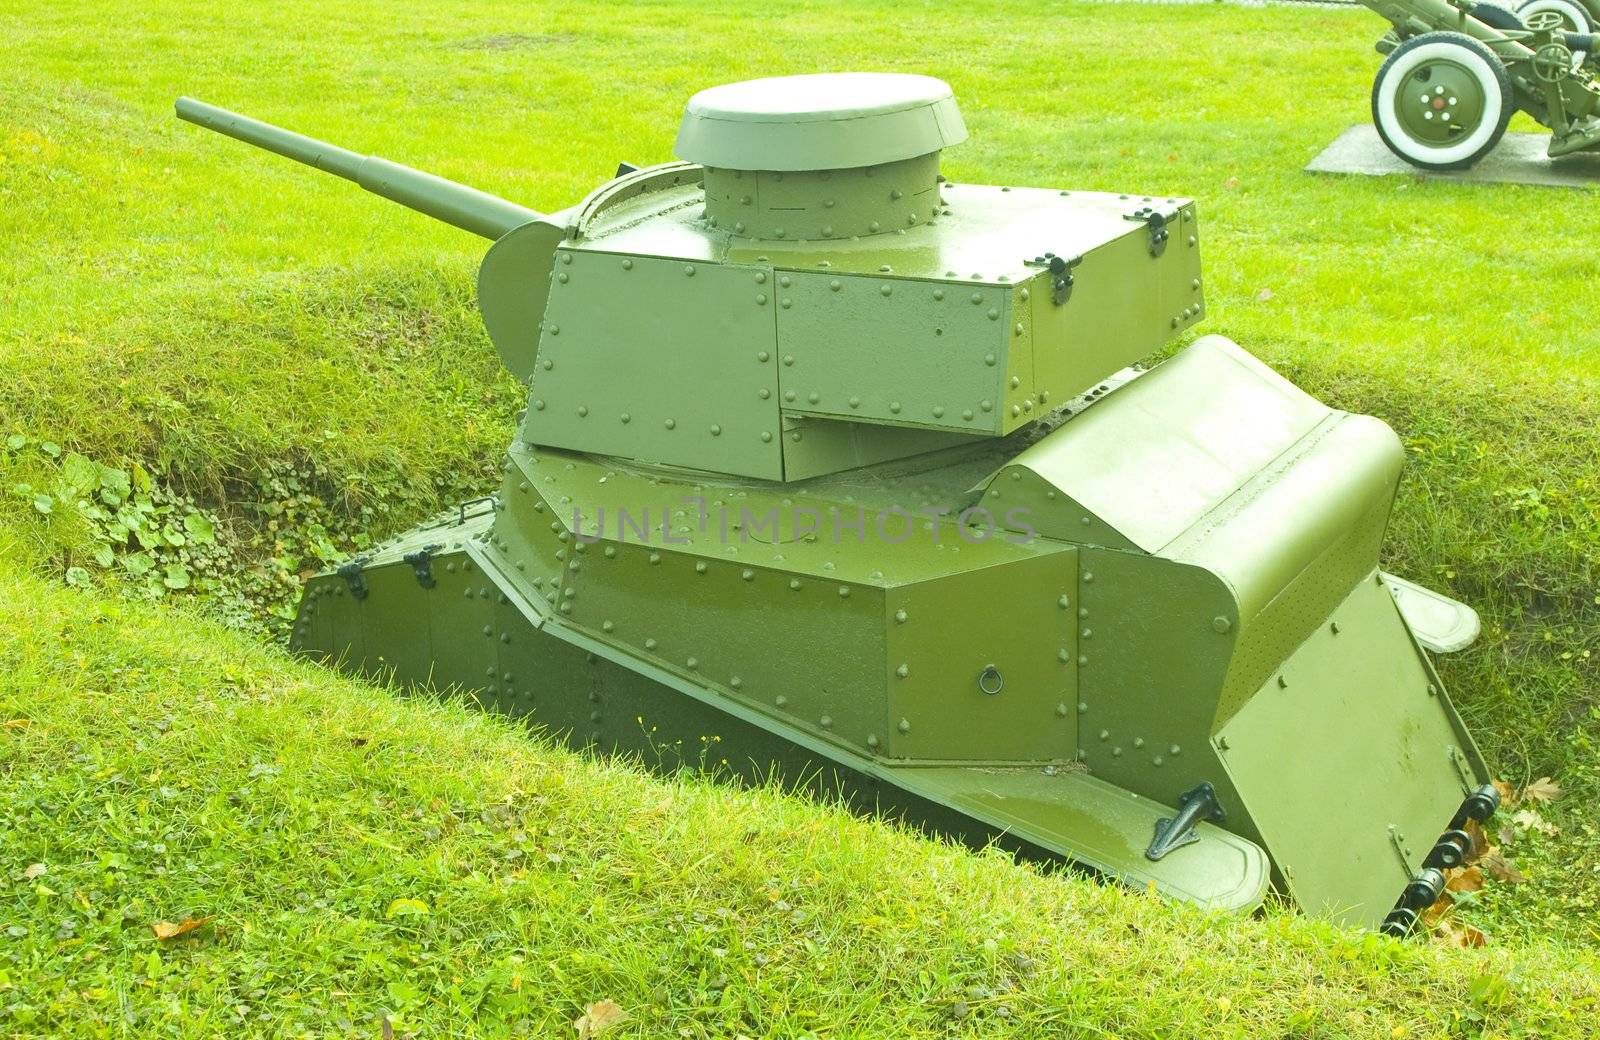 The MS1 Tank Construction. Fixed Armored Weapon Emplacement.